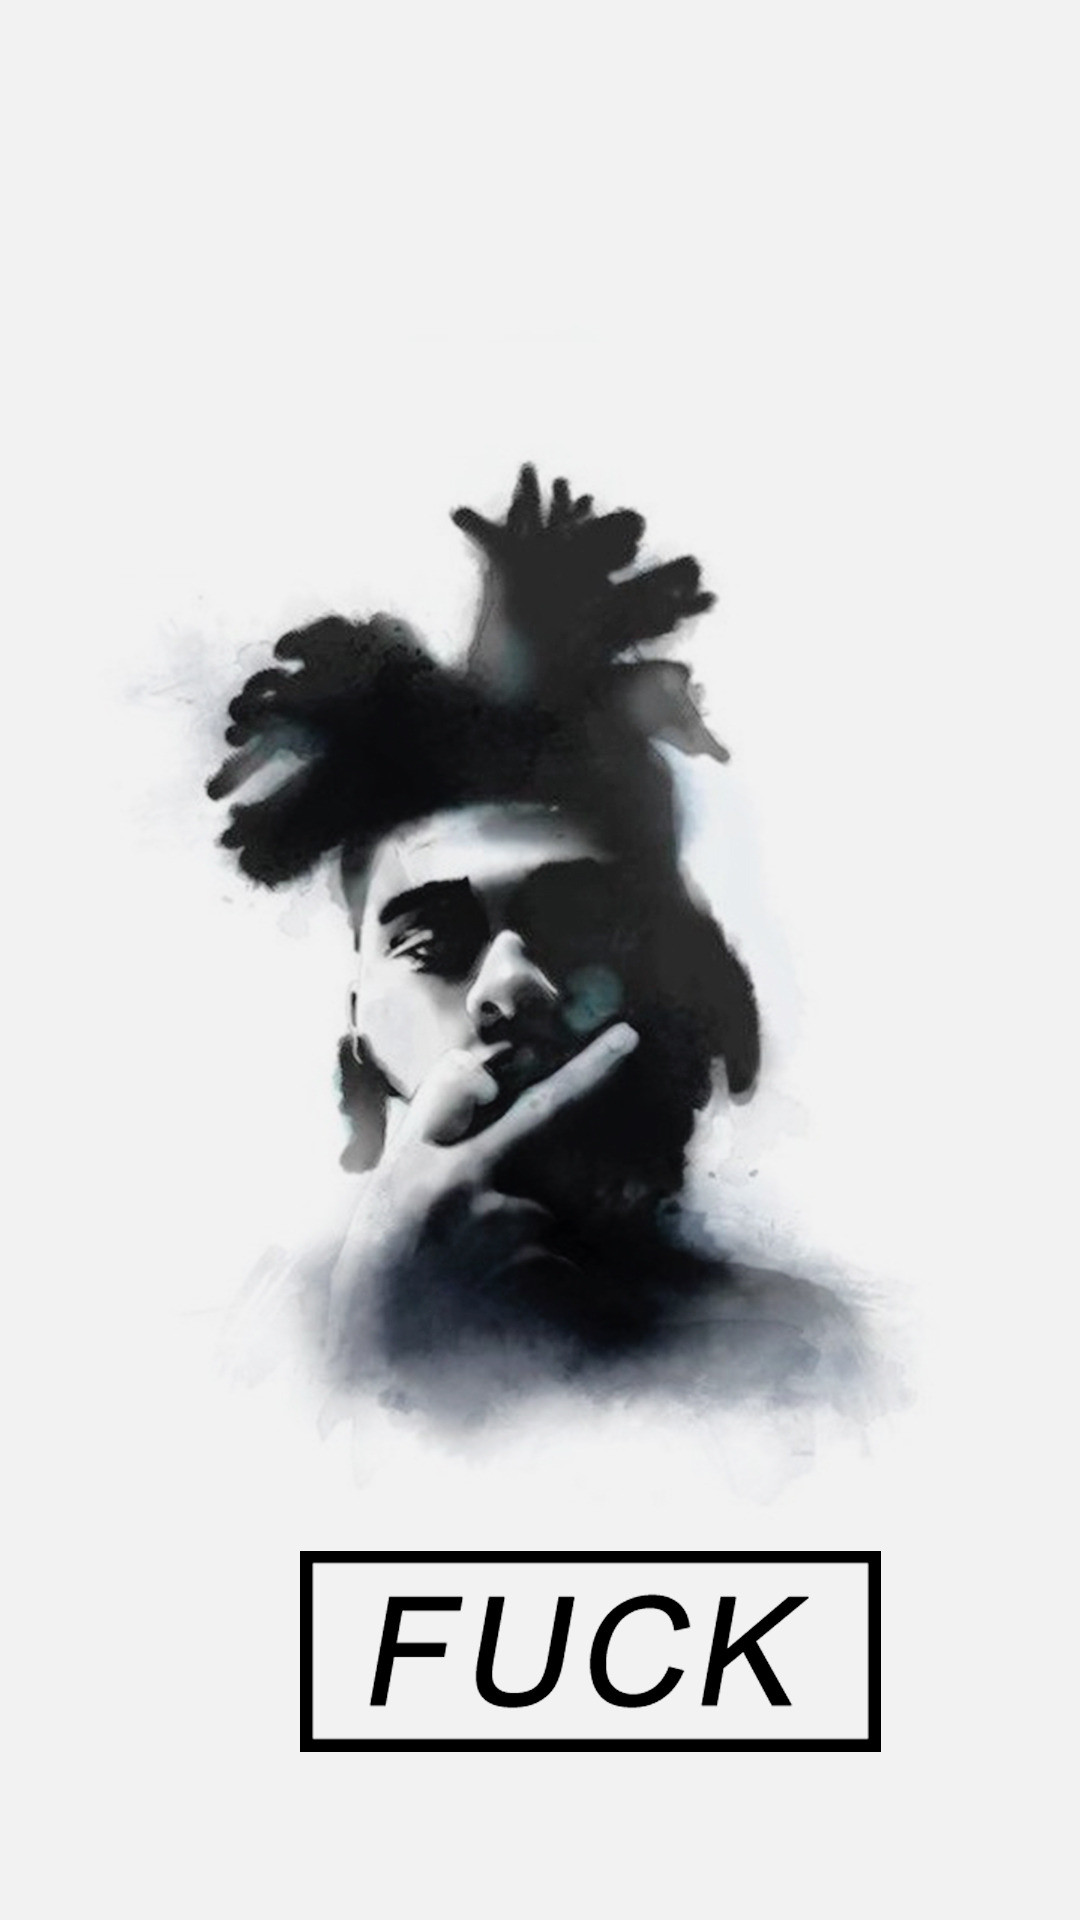 The weeknd the weeknd lockscreen the weeknd lockscreens the weeknd background the weeknd backgrounds the weeknd